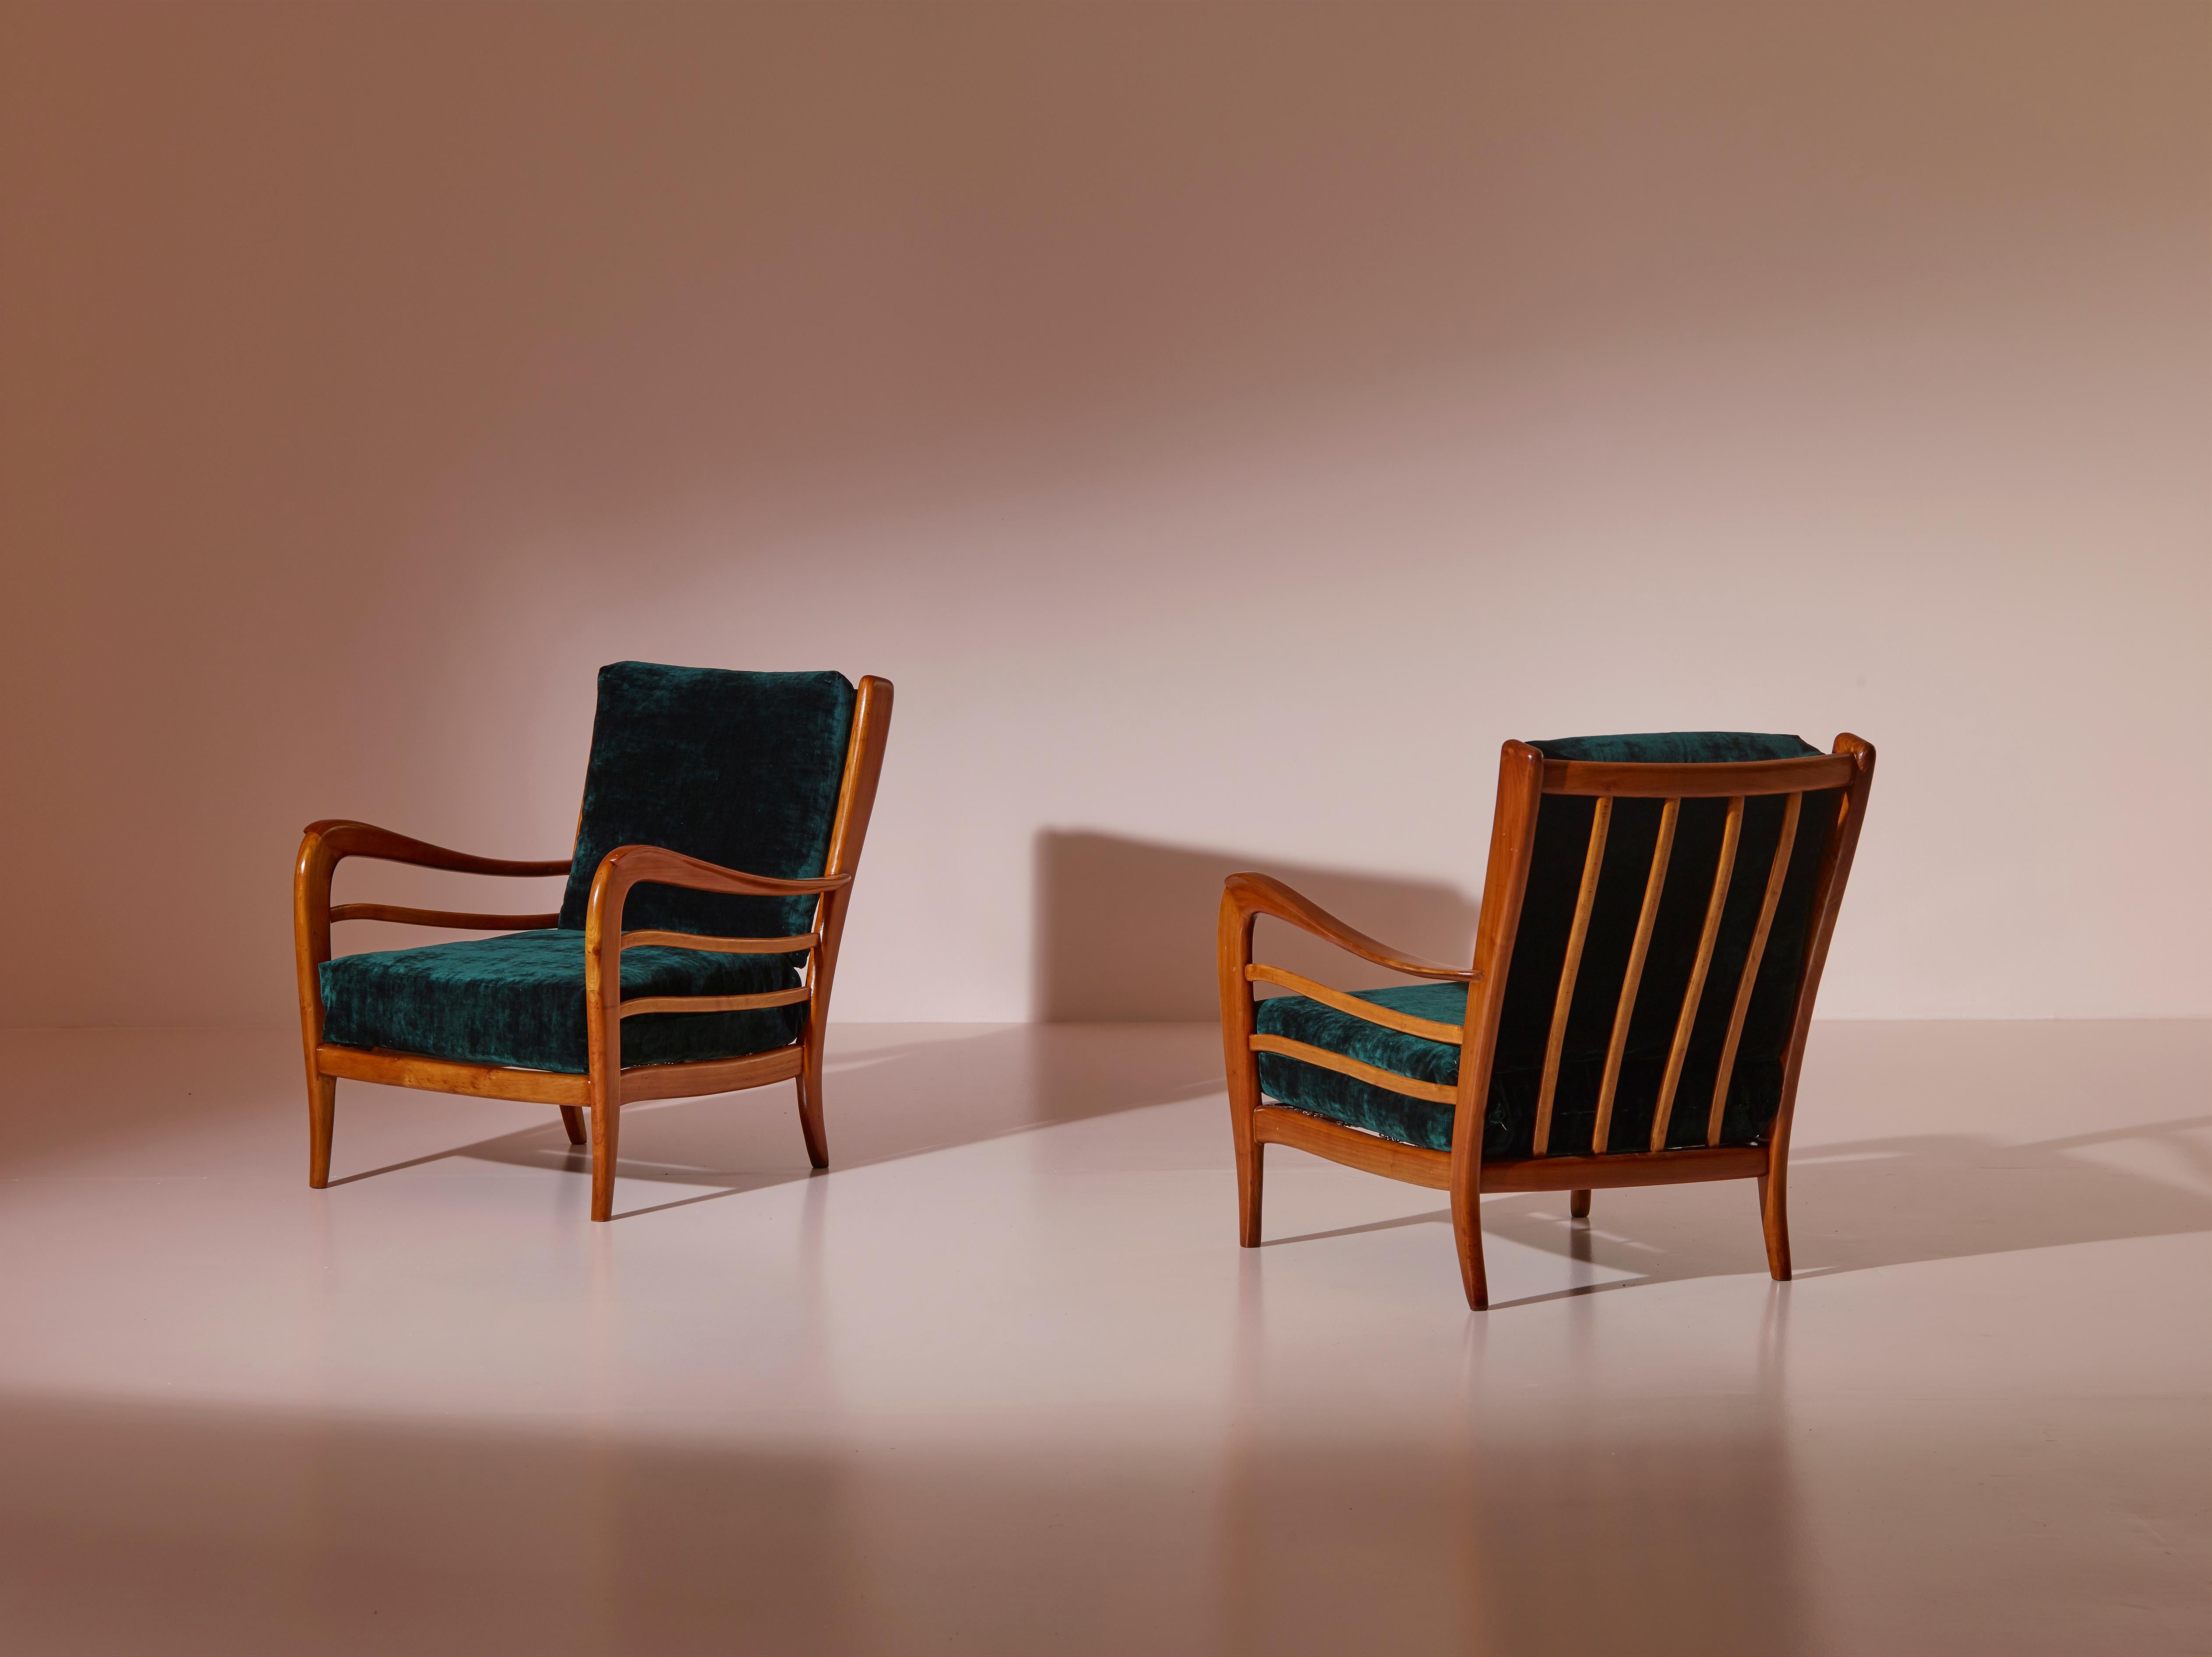 A beautiful pair of Italian mid-century armchairs designed and produced in Italy during the 1950s. Crafted from beech, their frames exhibit a well-proportioned, rustic yet organic design, paying homage to Buffa's iconic aesthetic.

These chairs,